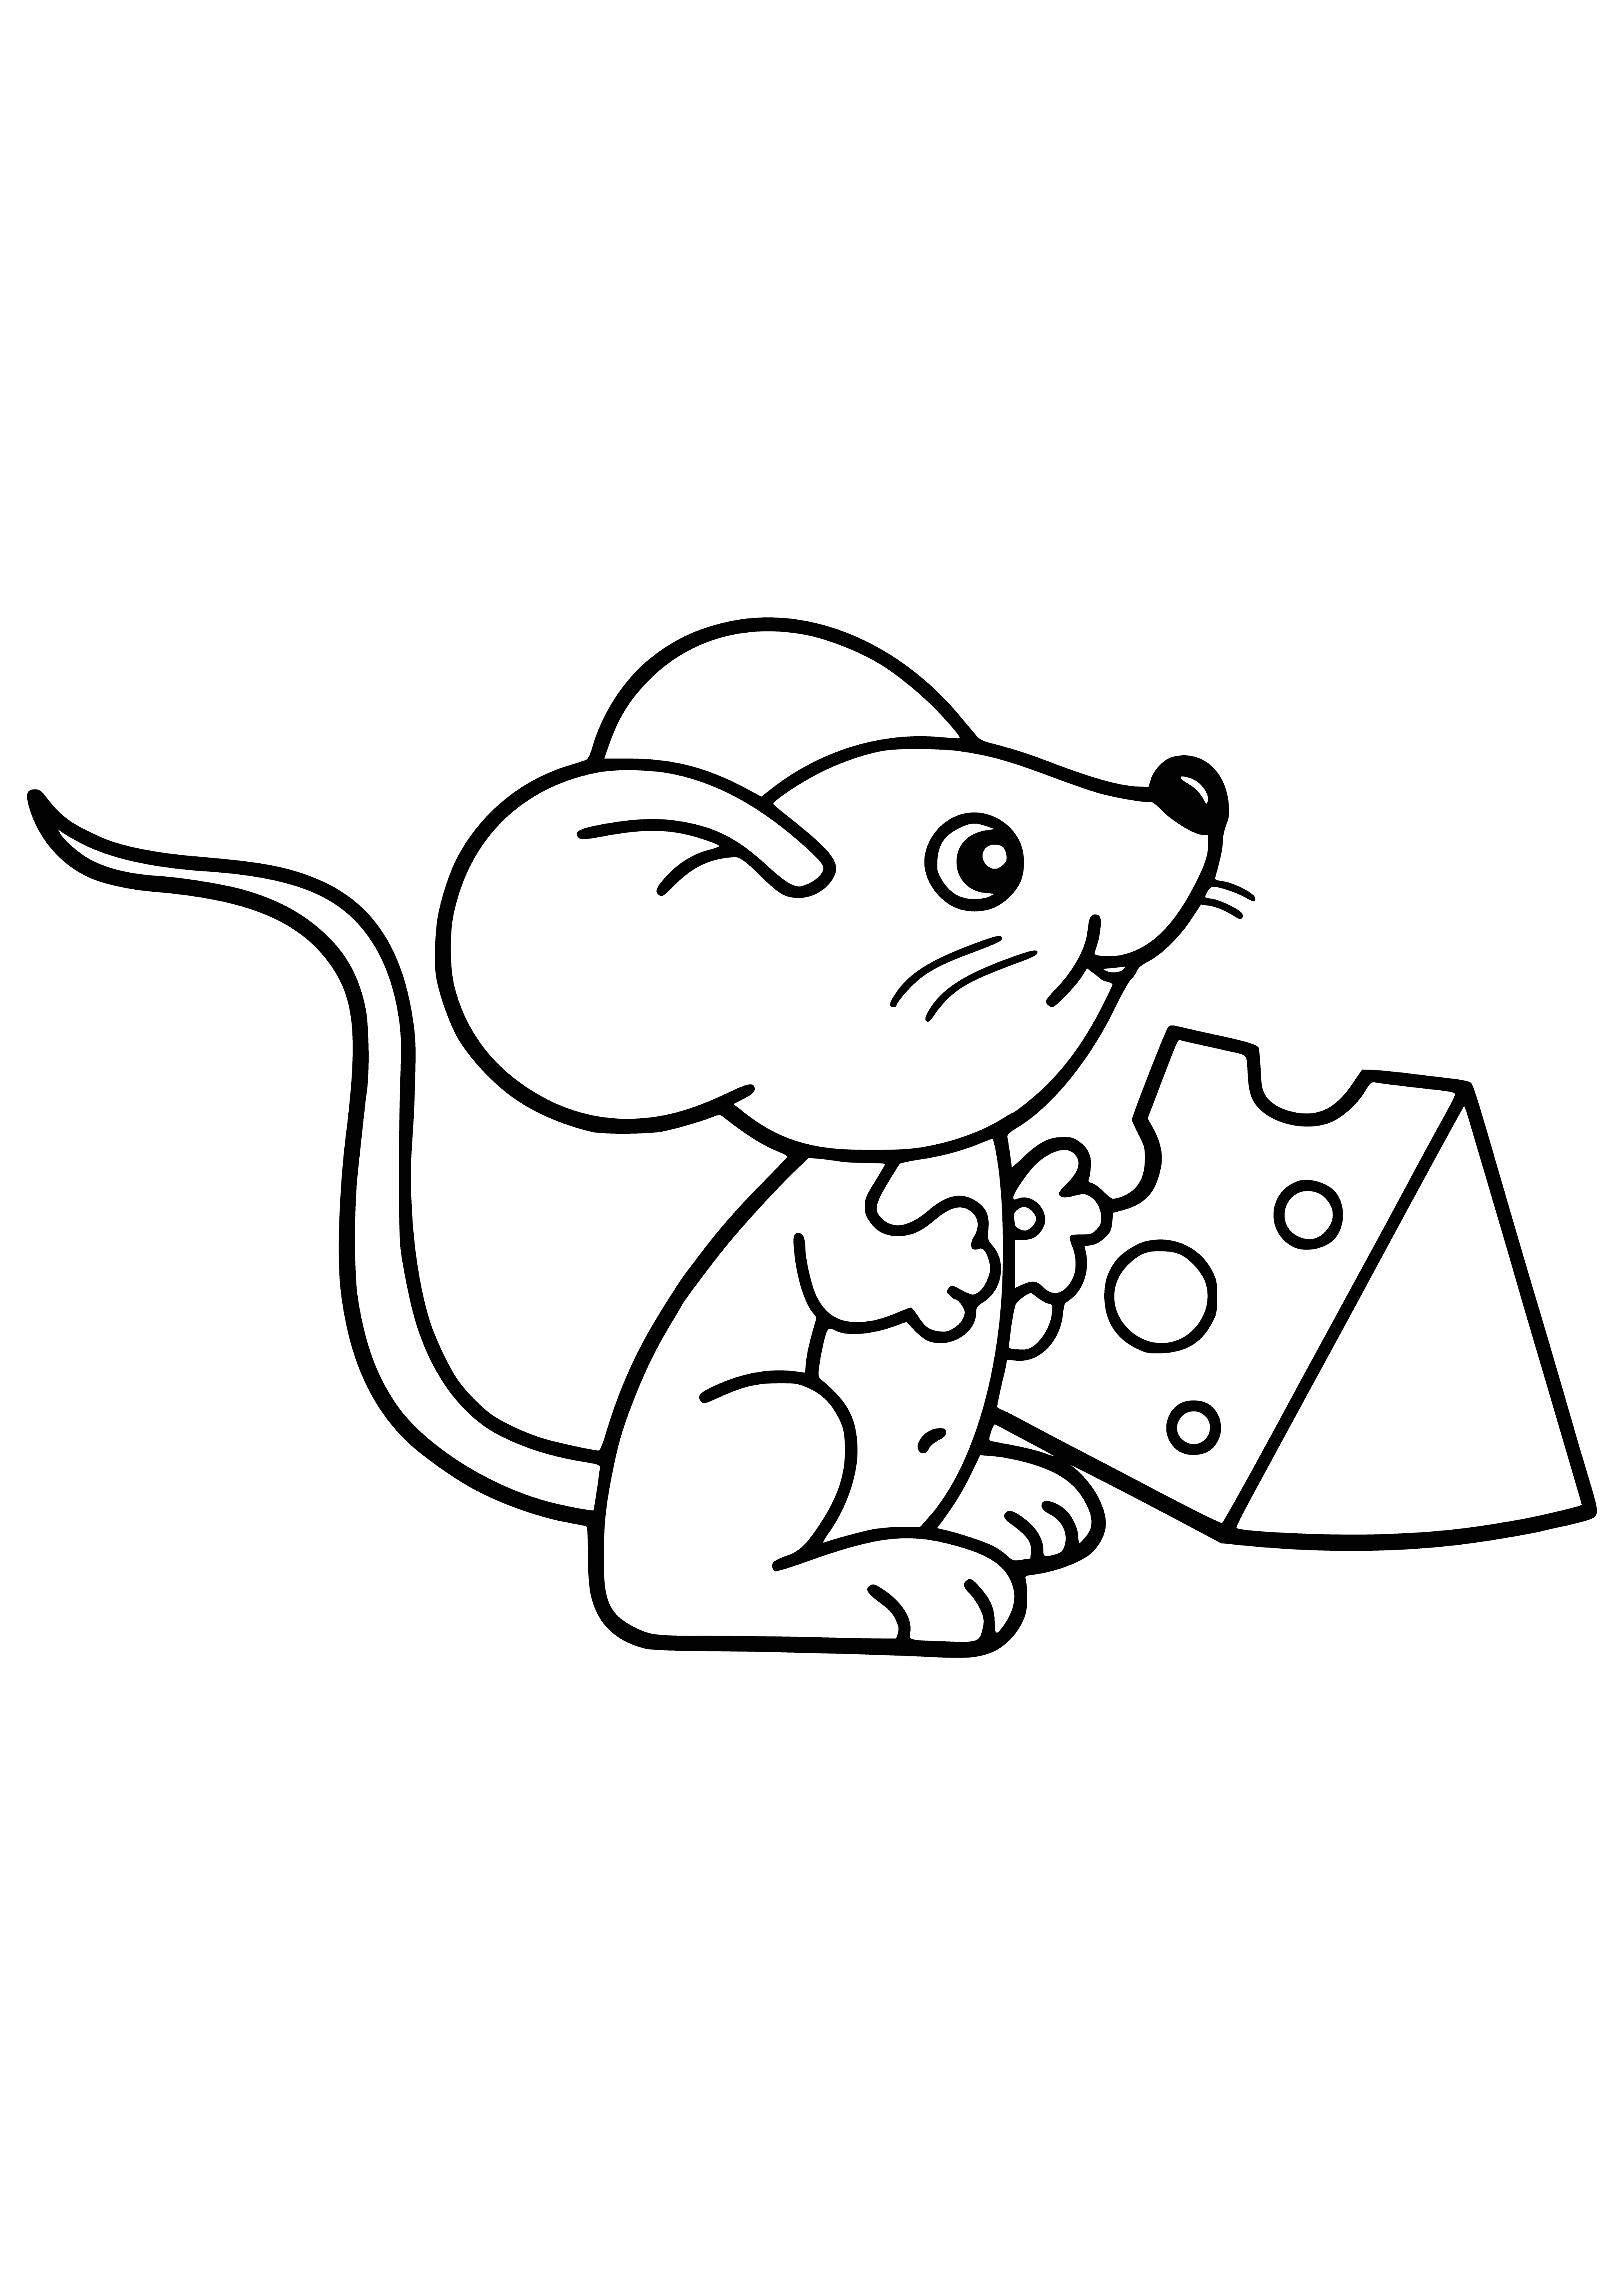 coloring page: Rat holds cheese, standing on hind legs, tails curled, small black eyes, long nose, brown fur and white belly.